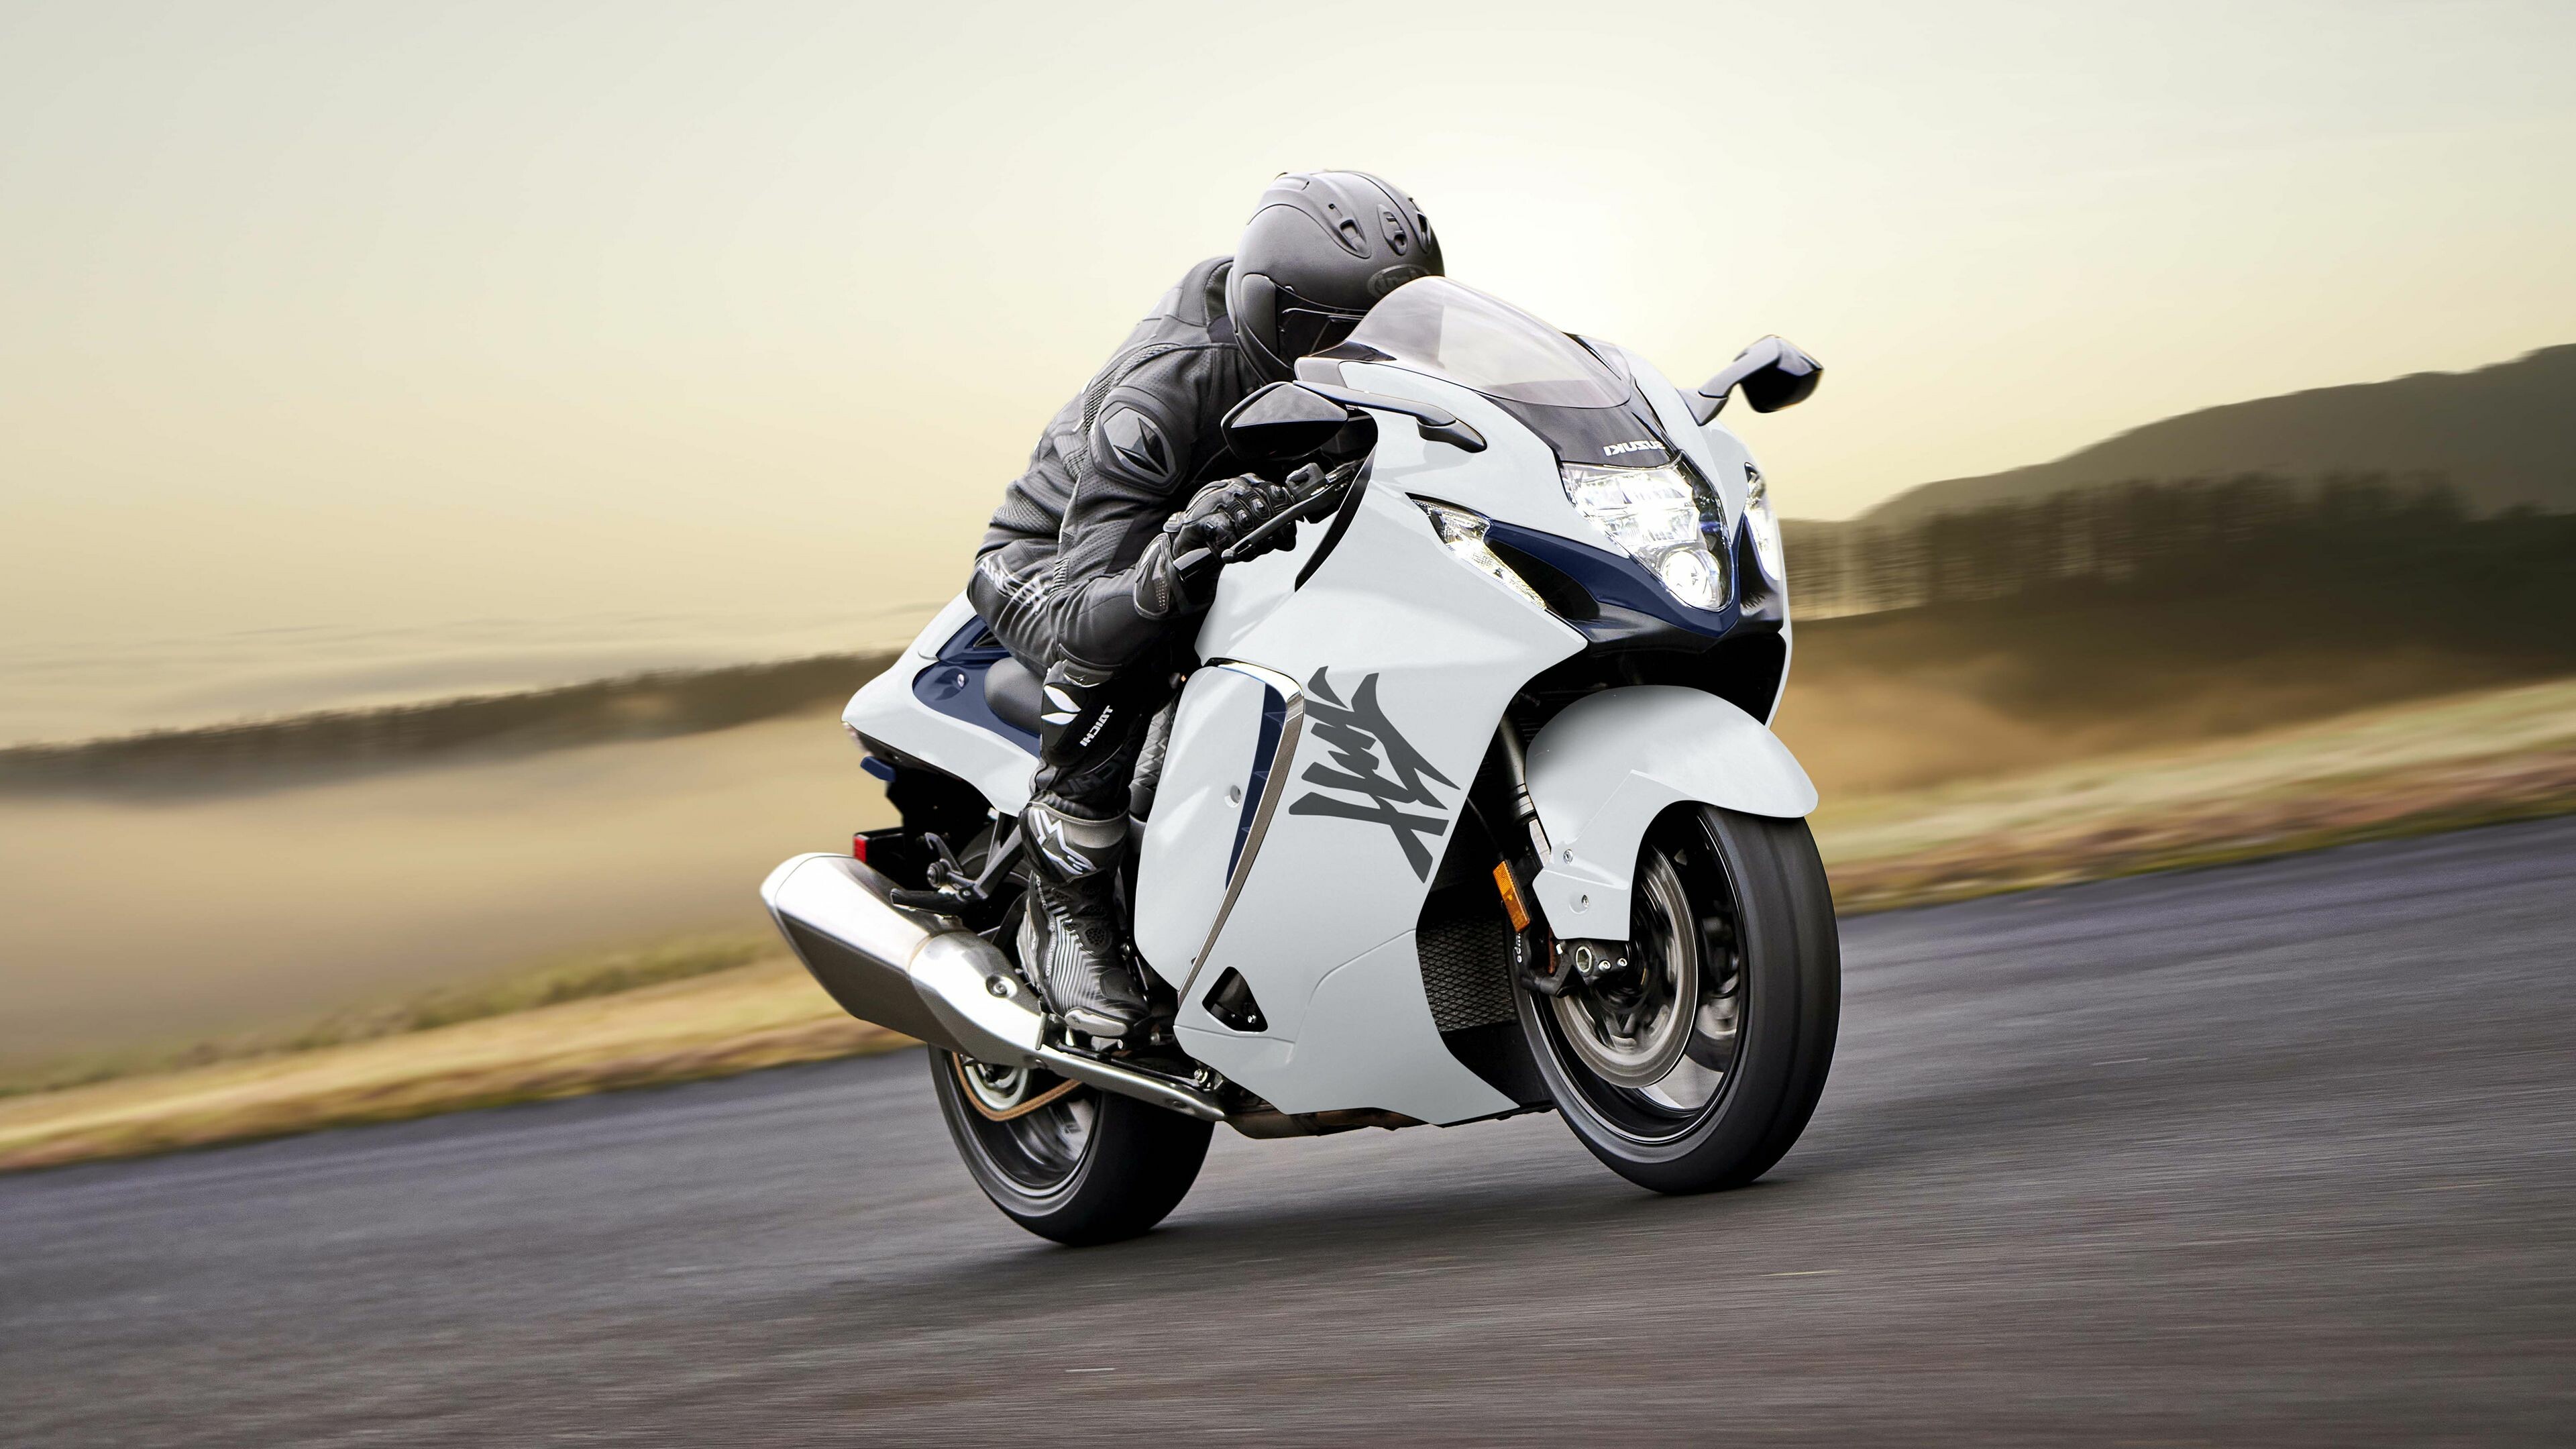 Suzuki Hayabusa: Sport bike, Features one of the best drag coefficients found on any street legal motorcycle. 3840x2160 4K Background.